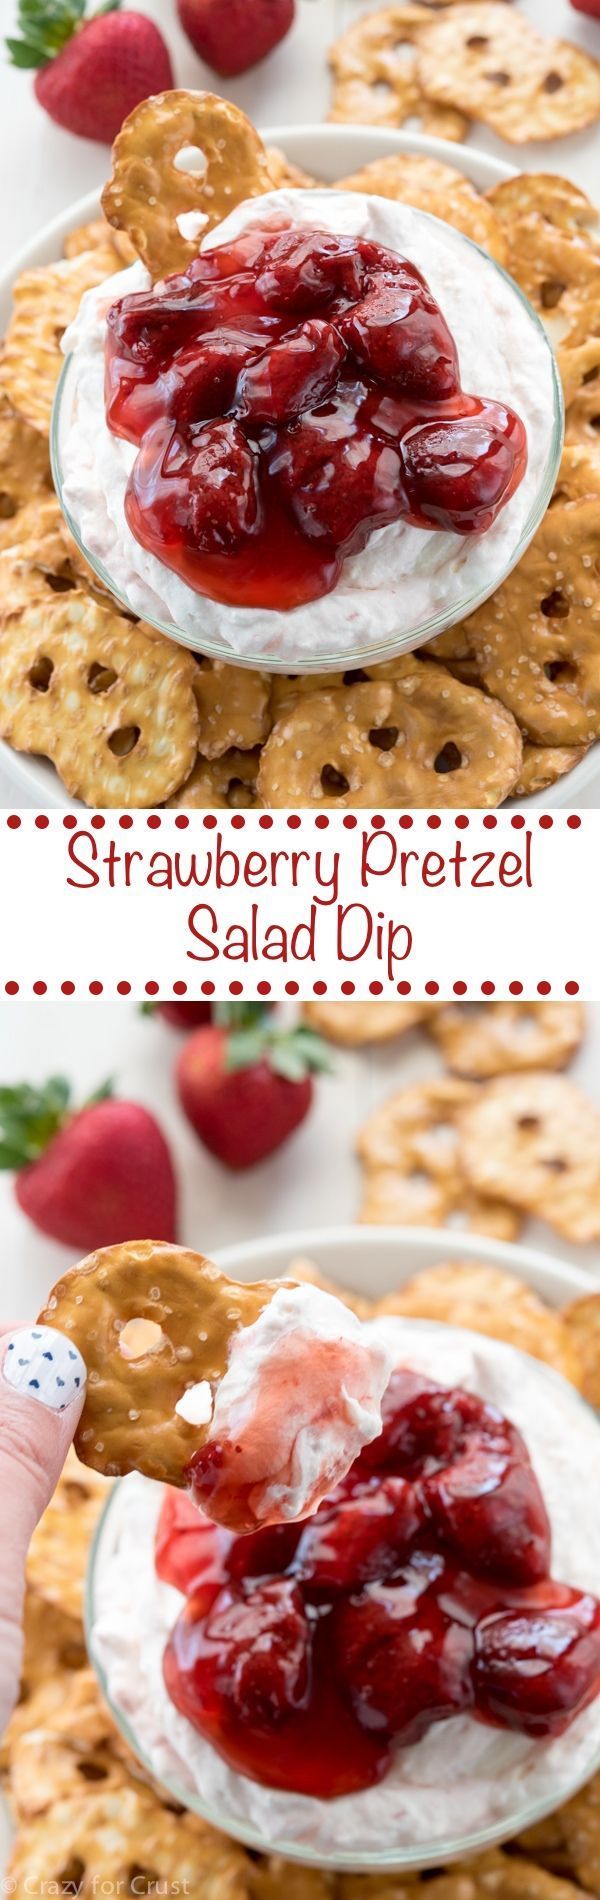 Strawberry Pretzel Salad Dip! Turn a no-bake summer dessert into an easy sweet dip recipe! Perfect for any